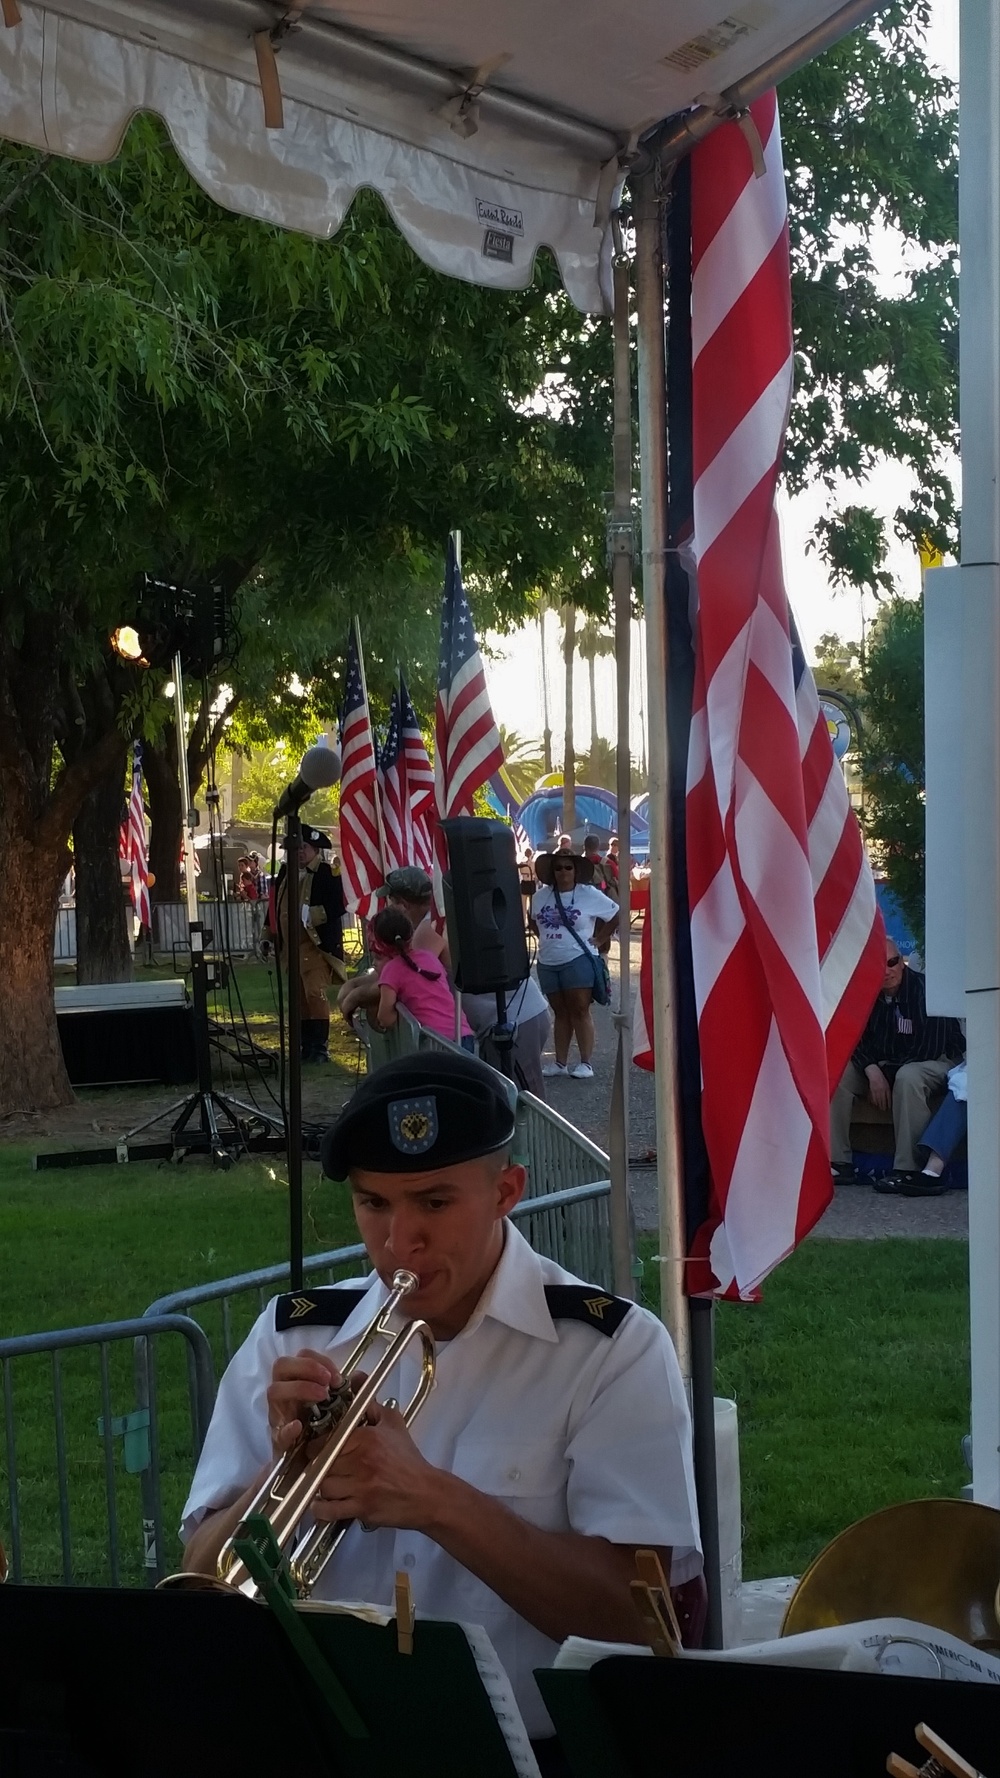 Army Band goes Live at the Firework Show